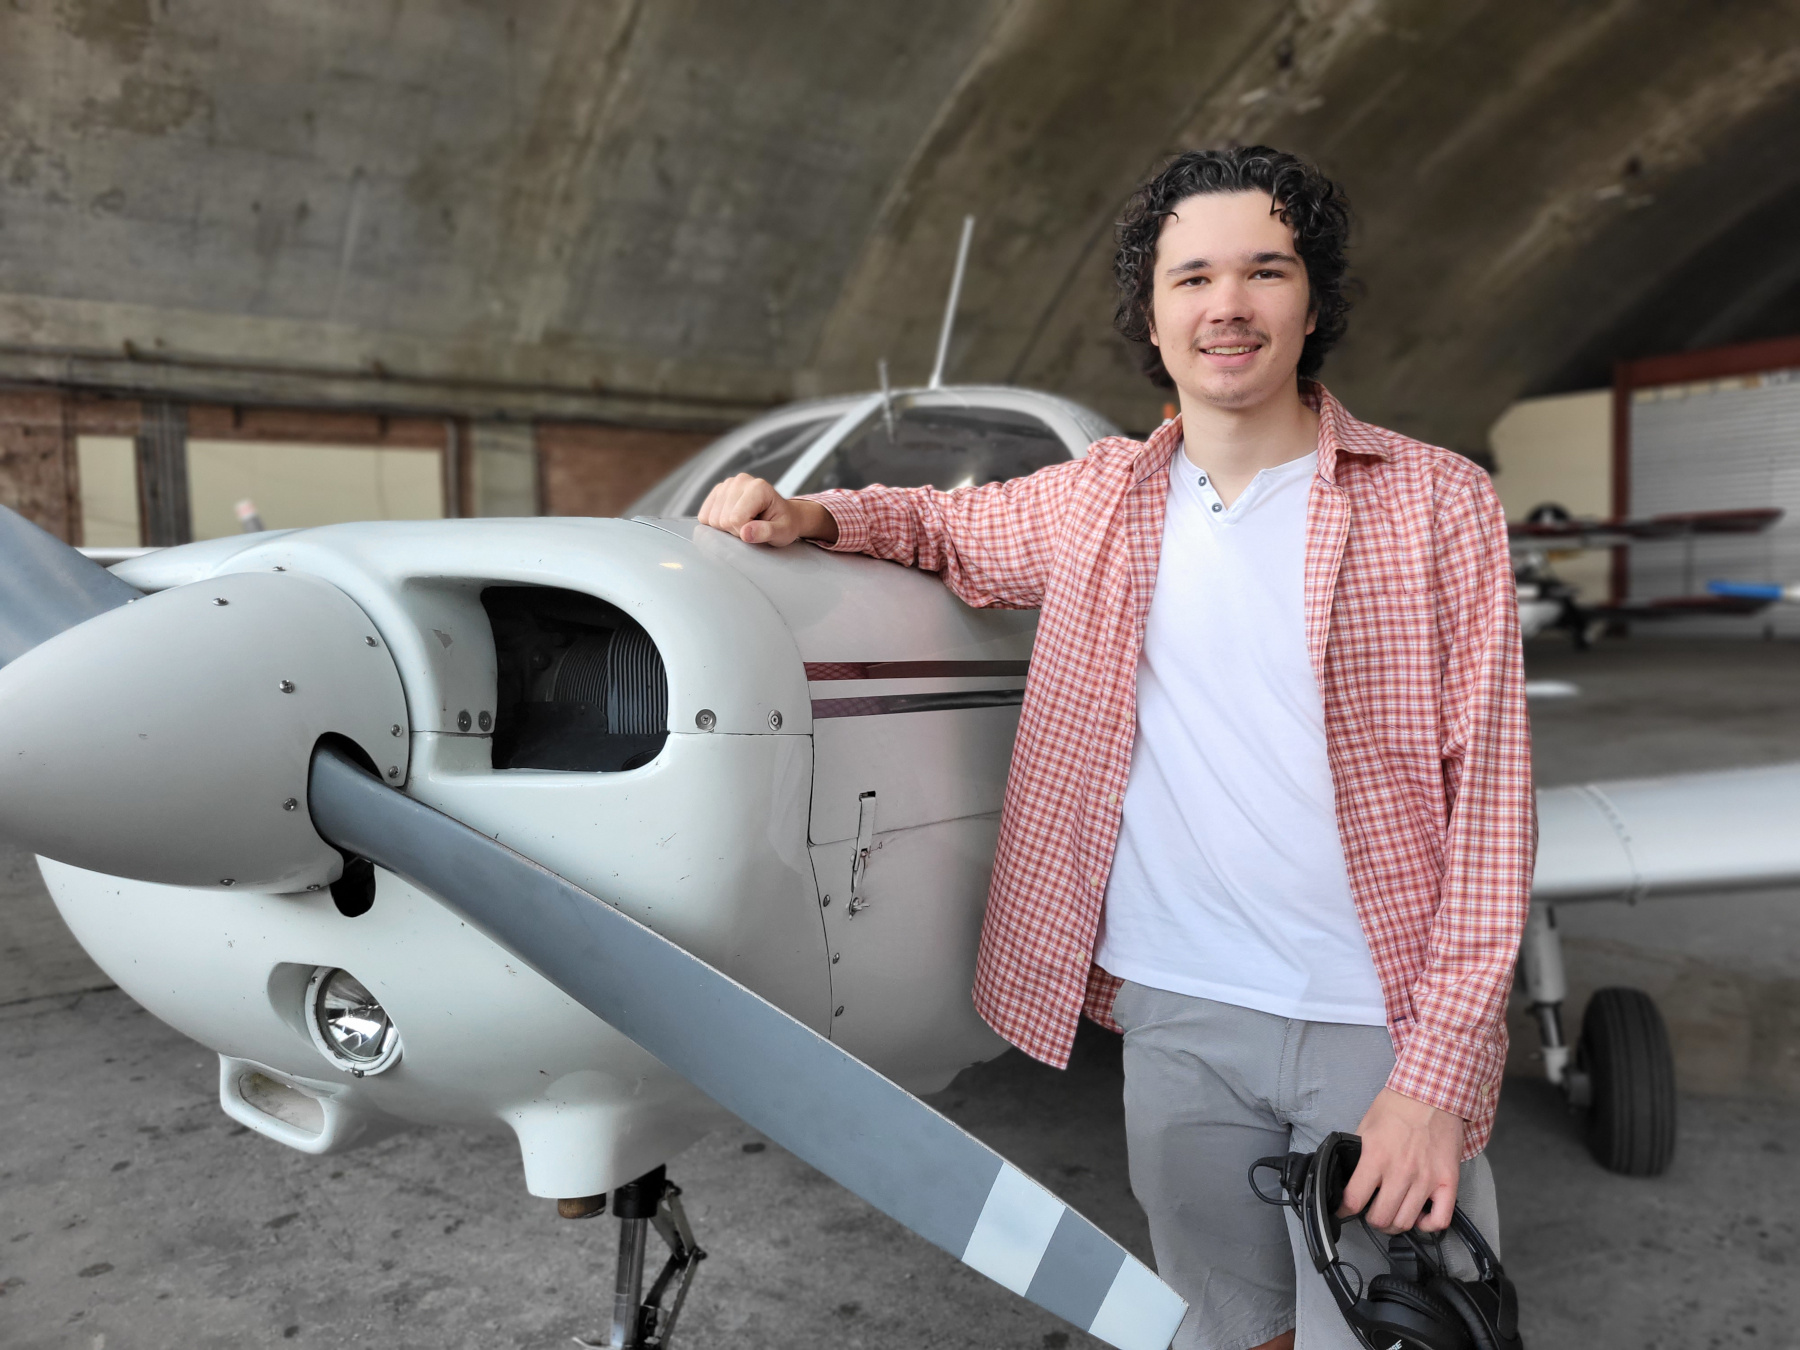 Jonathan Ryan standing by a small aircraft